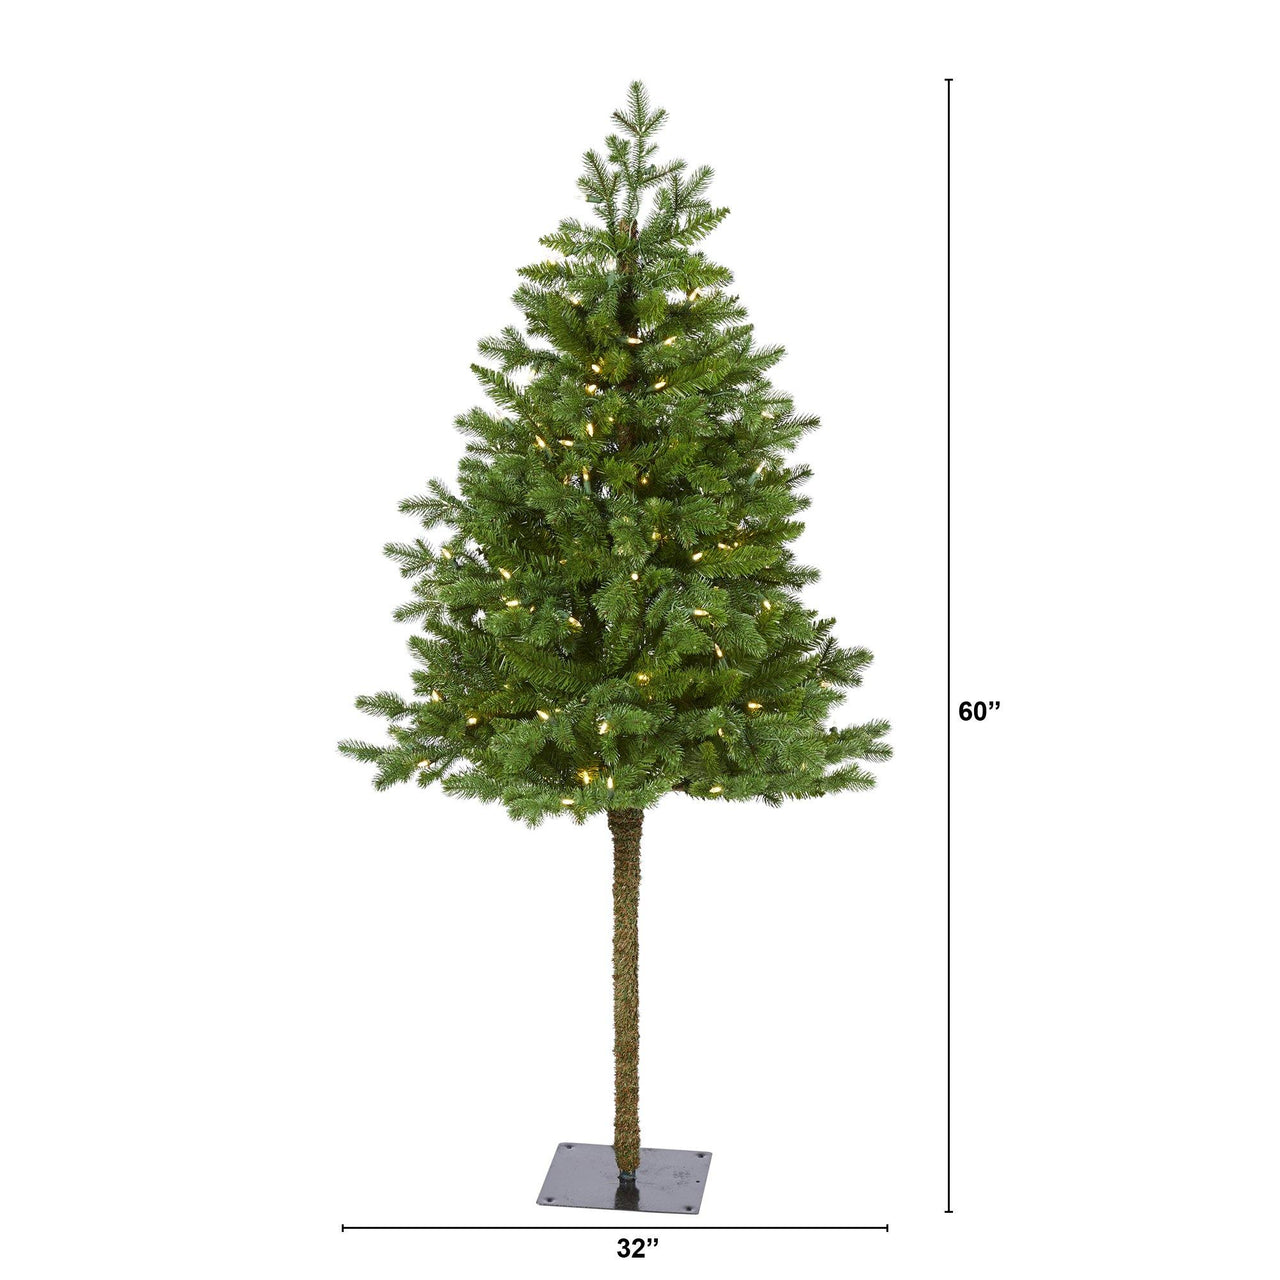 5' Swiss Alpine Artificial Christmas Tree with 150 Clear LED Lights and 270 Bendable Branches - The Fox Decor